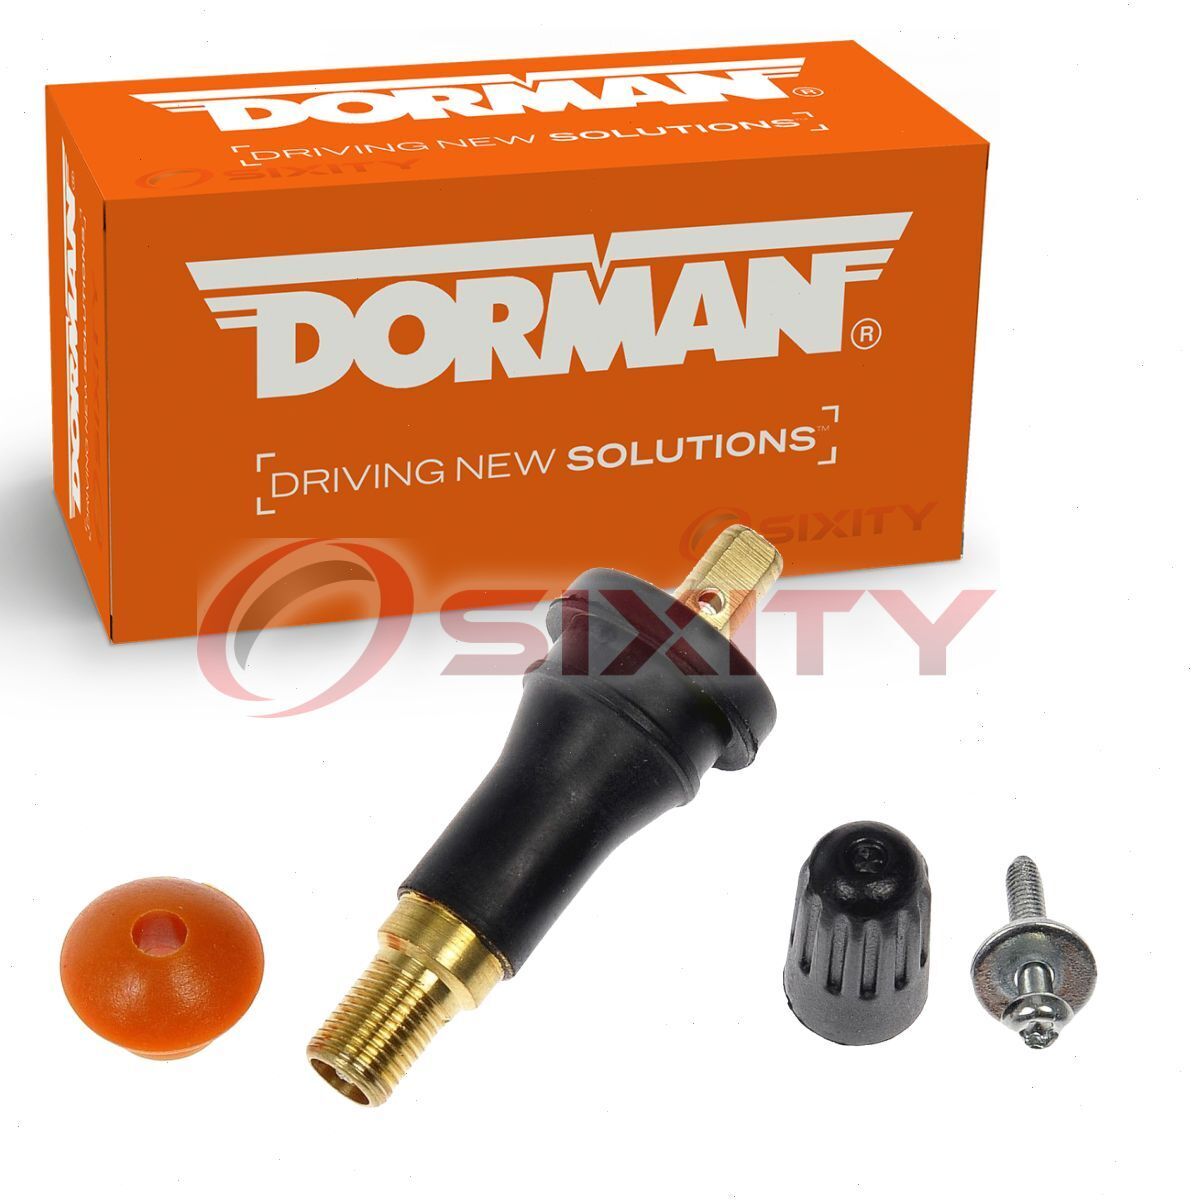 Dorman TPMS Valve Kit for 1999 BMW 323is Tire Pressure Monitoring System  sm